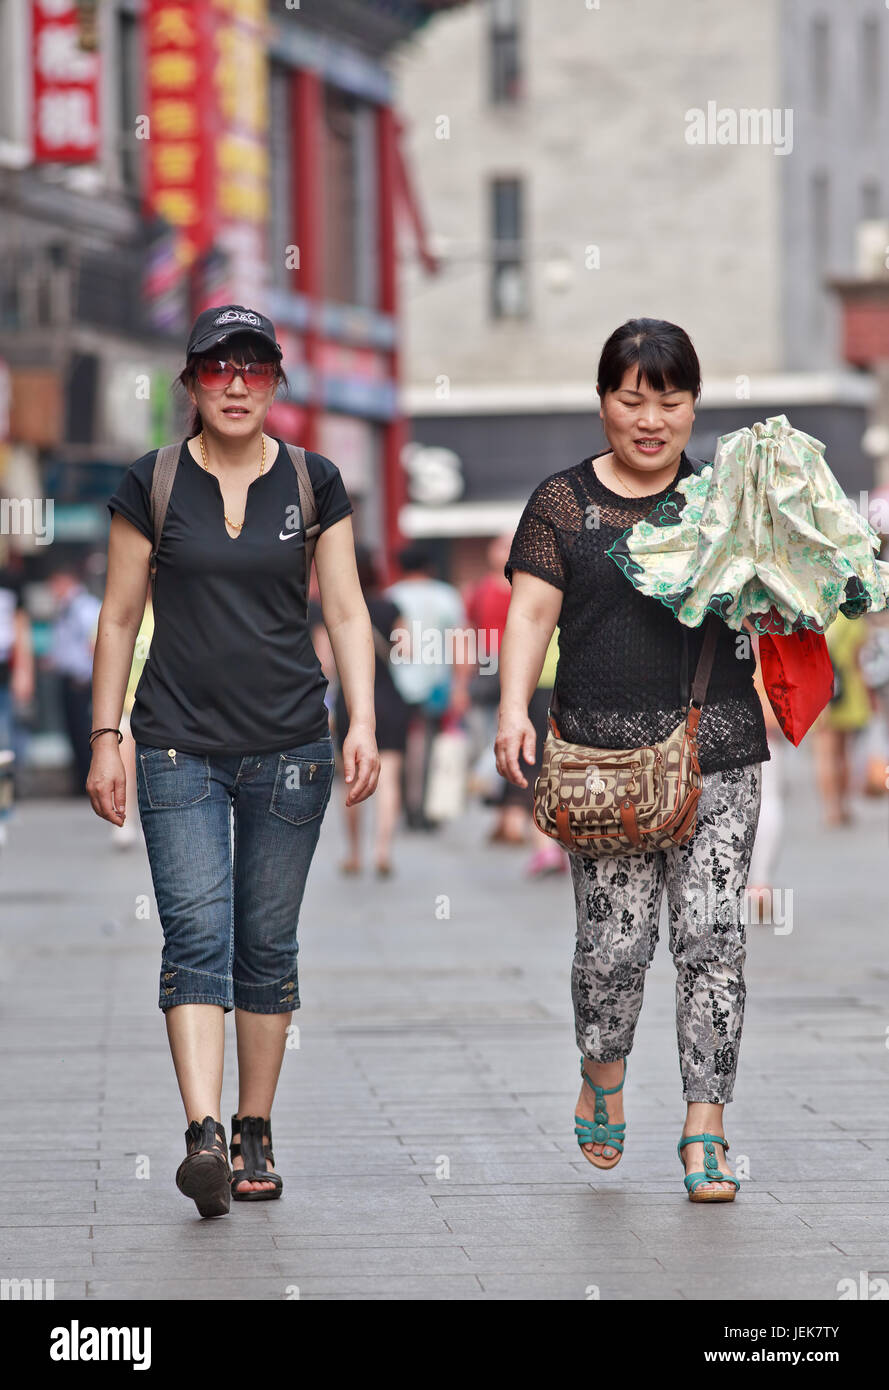 BEIJING-JUNE 9, 2015. Middle aged woman in Beijing center. Lives of women in China have significantly changed after government made great efforts. Stock Photo